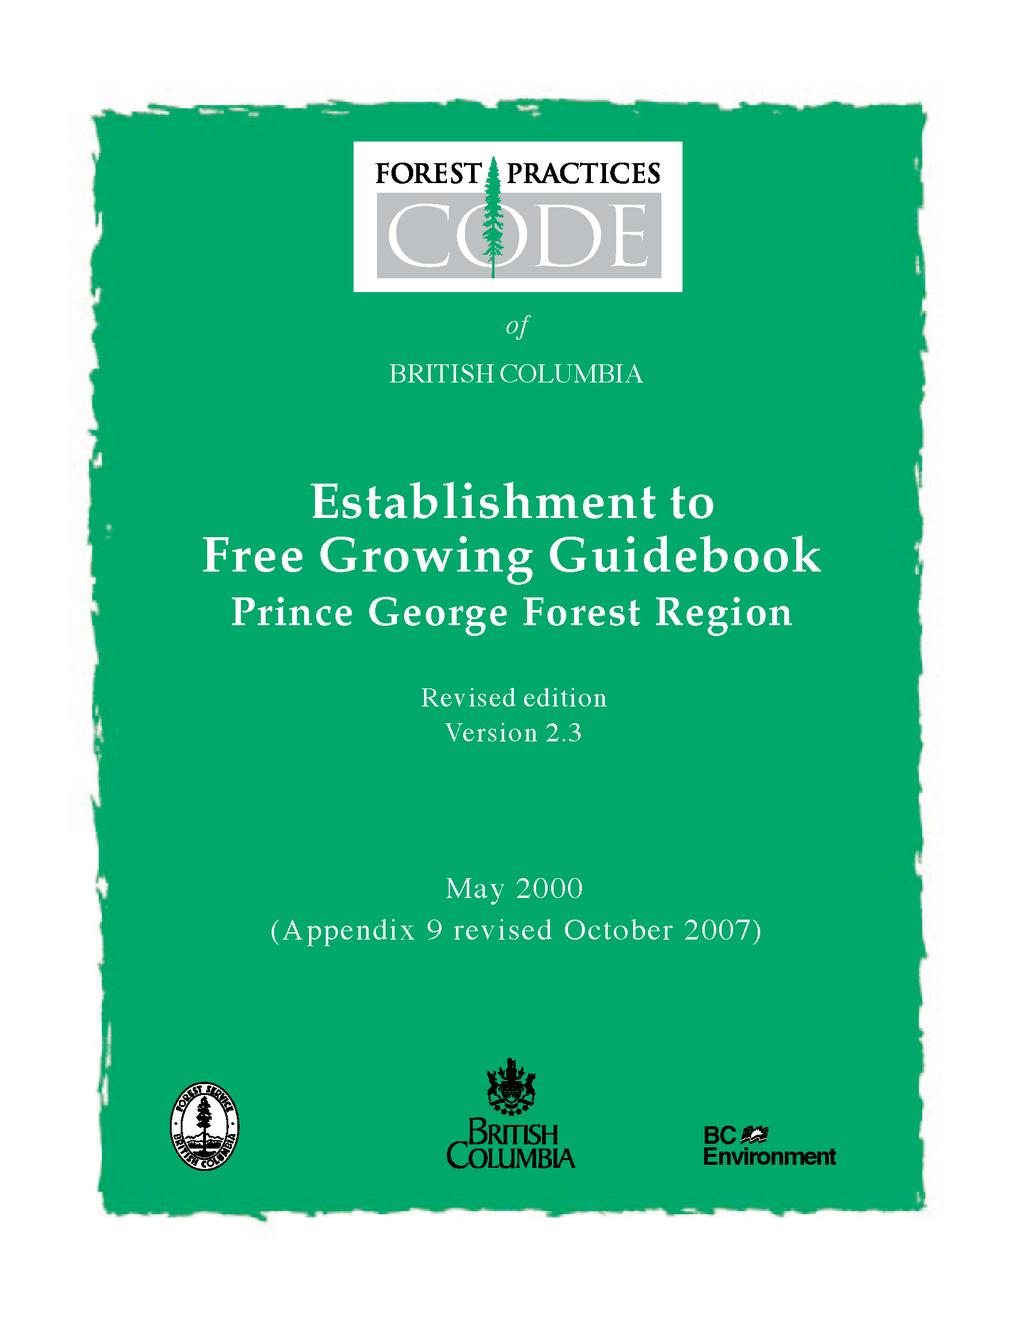 This Forest Practices Code Guidebook is presented for information only. It is not cited in regulation.